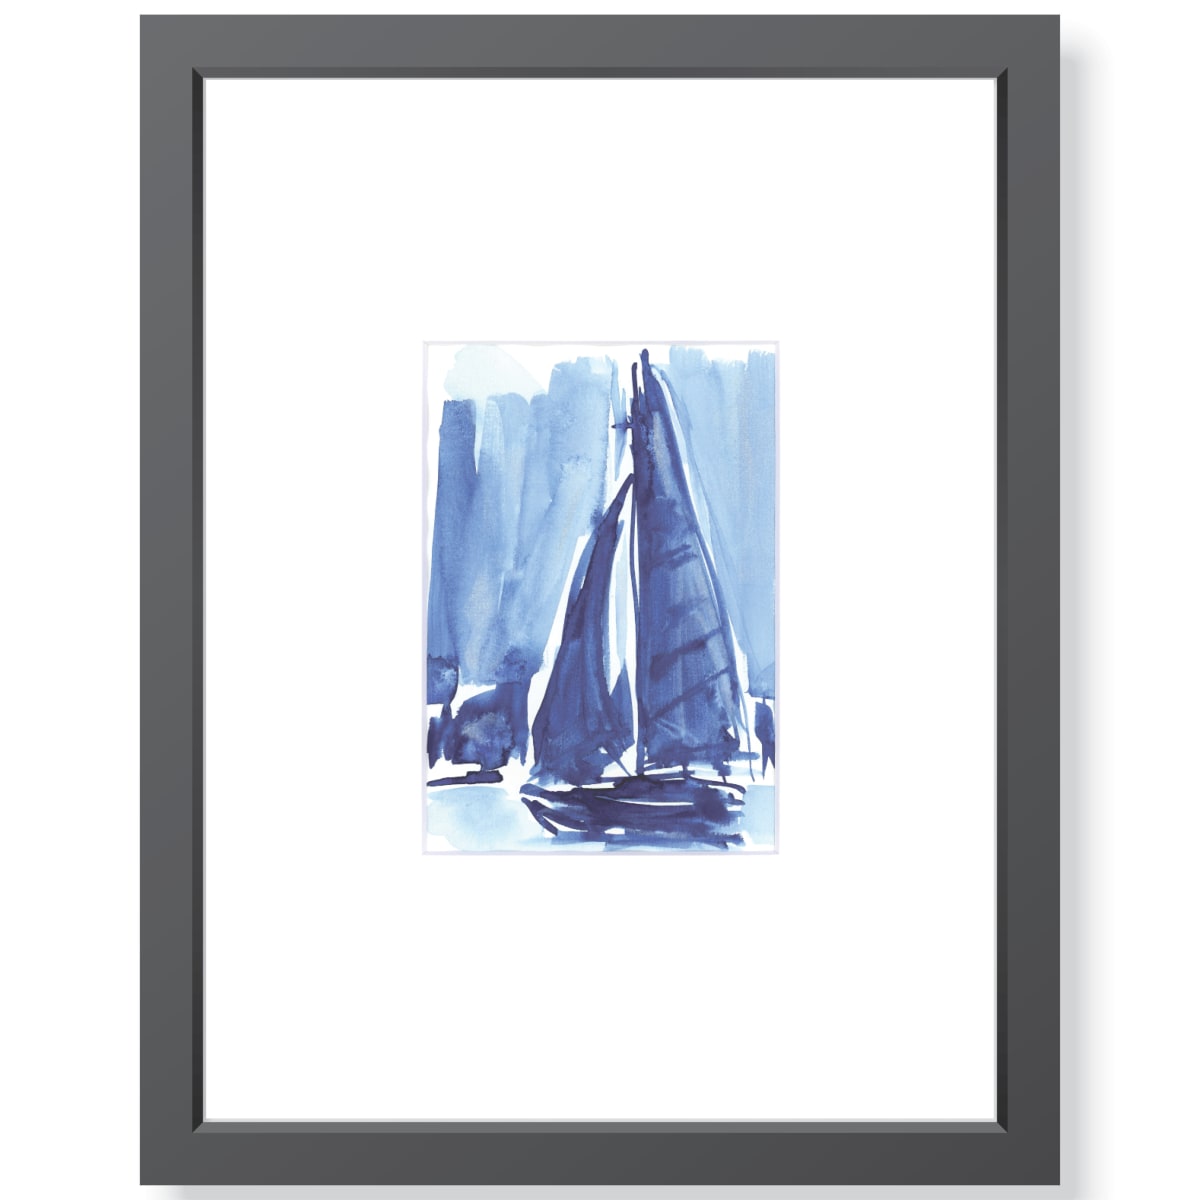 Where are you most in need of God's direction? by JJ Hogan  Image: Nautical-inspired blue and white watercolor; black gallery frame, matted under glass. CORRECTION, WHITE FRAME